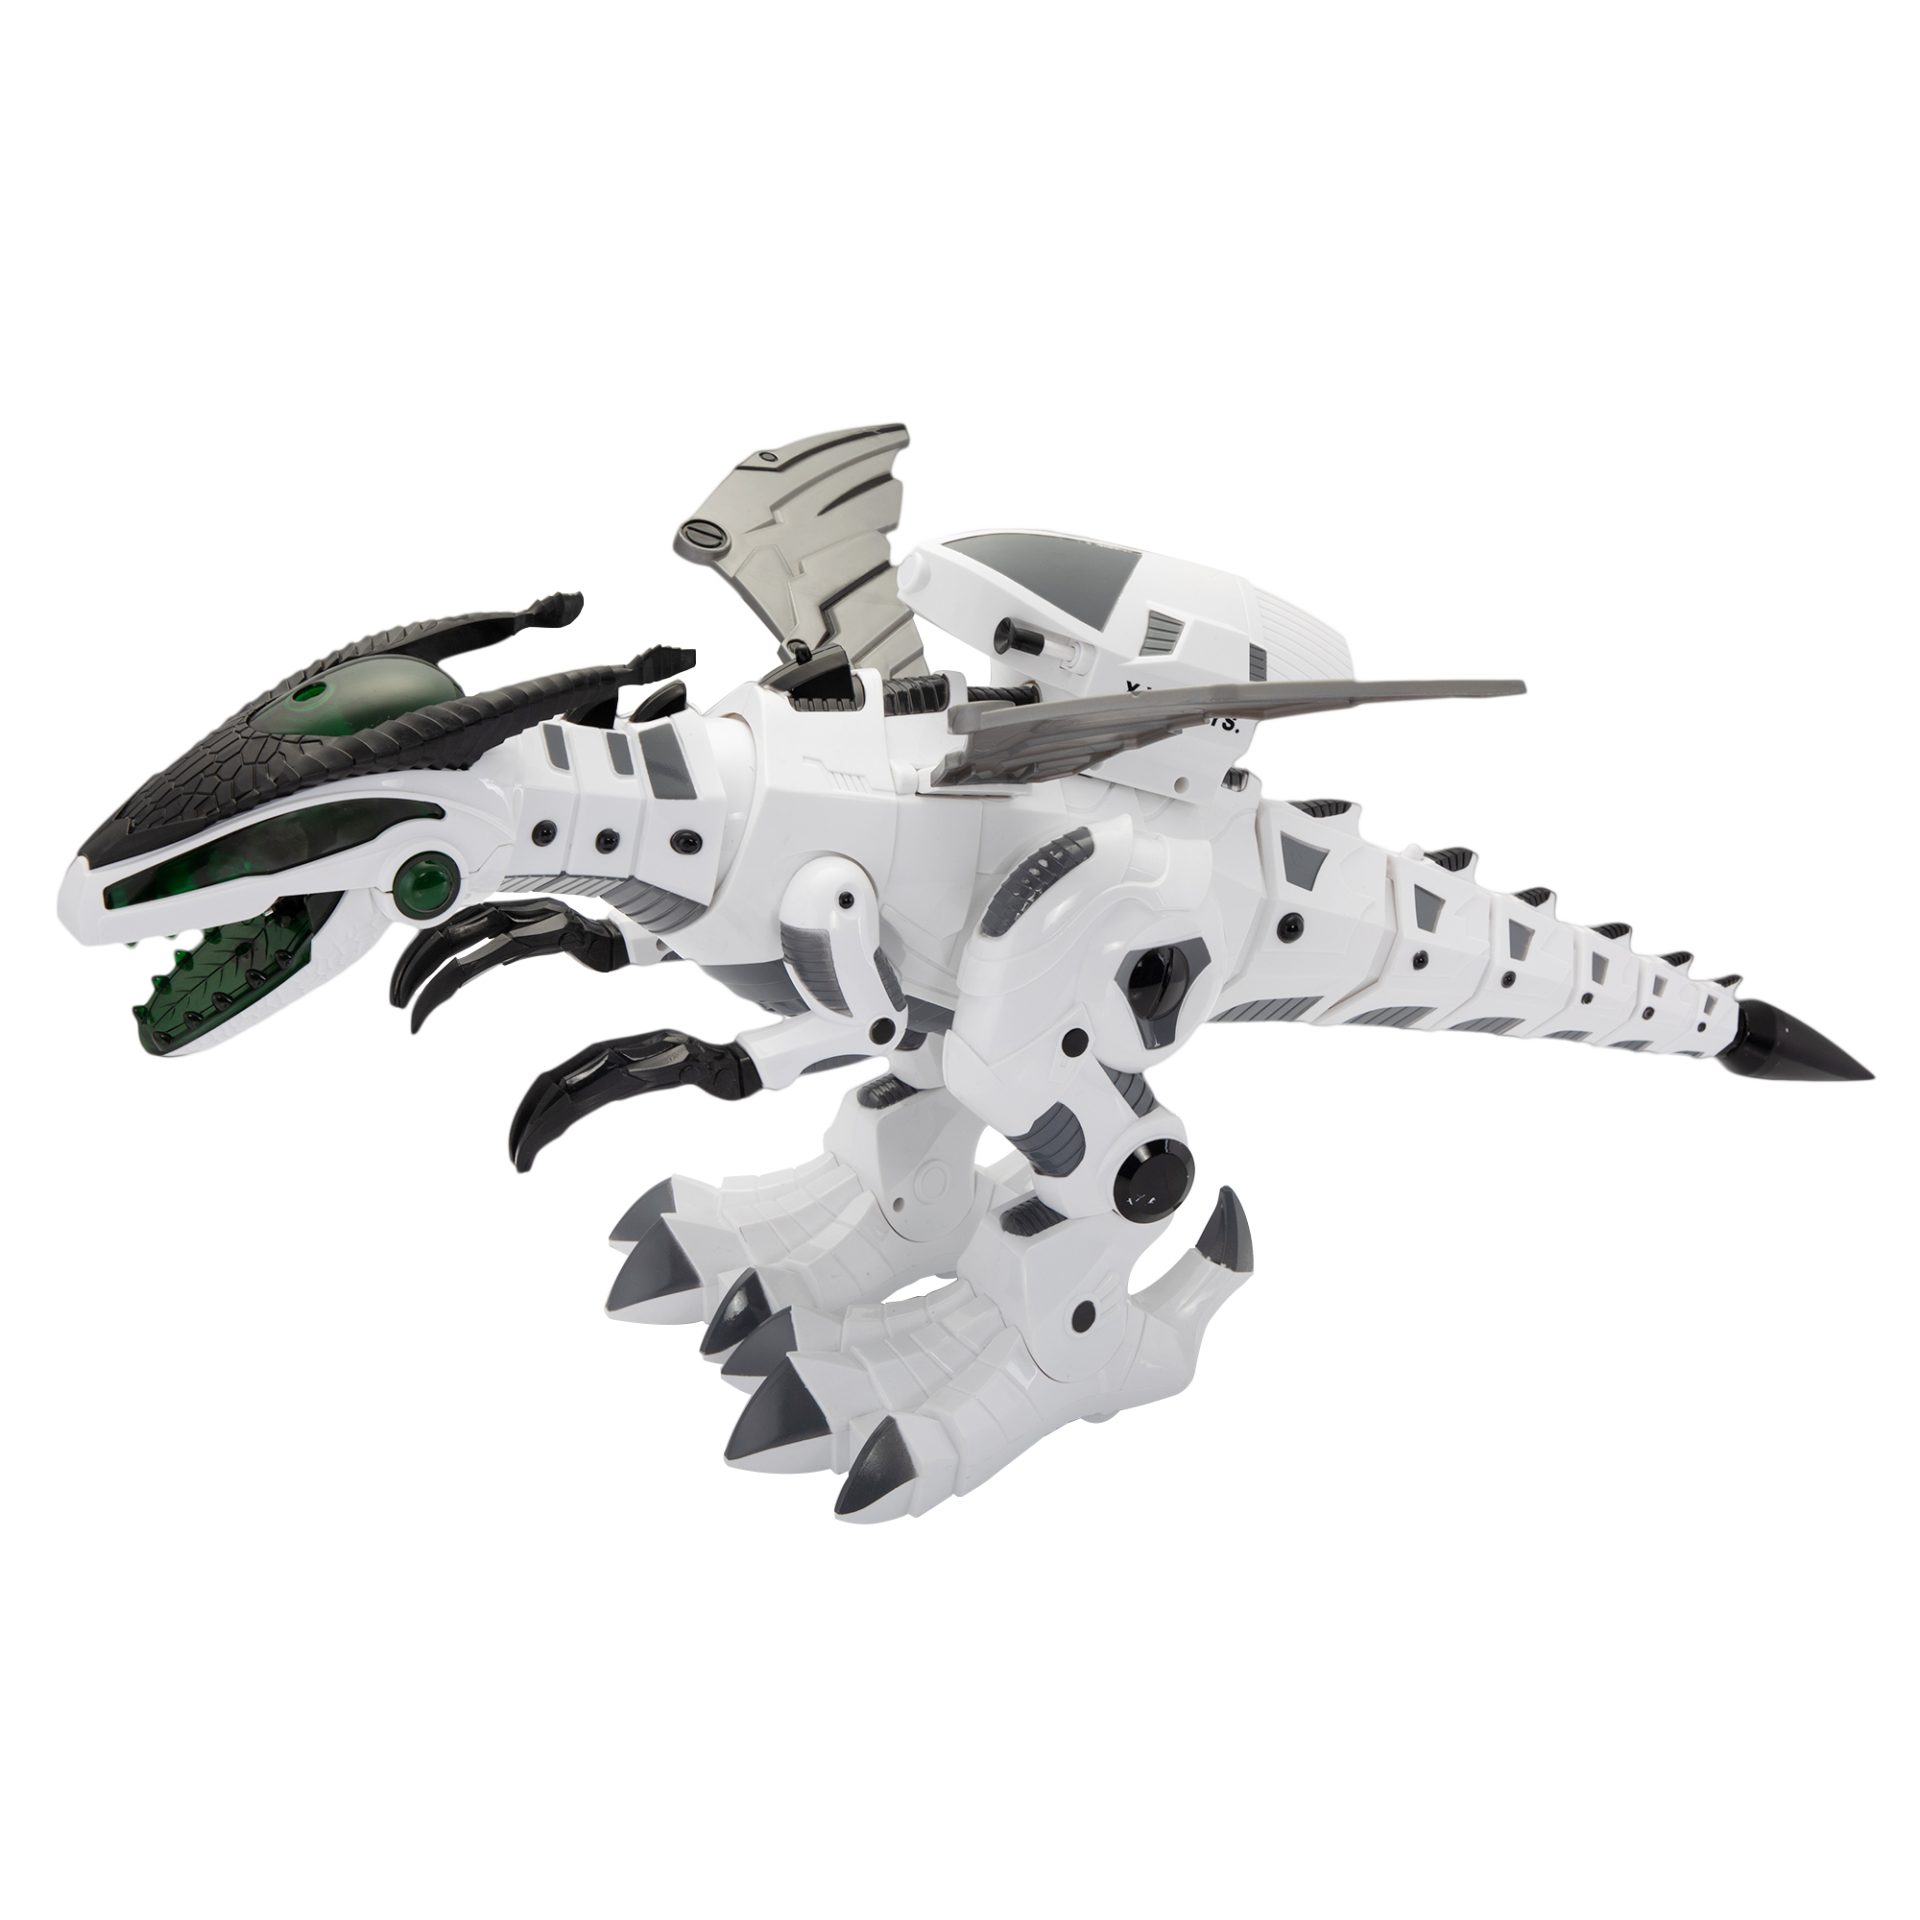 Nyeekoy Remote Control Dinosaur Robot, Intelligent Interactive Smart Toy with Singing, Dancing, Storytelling, Missiles Launching and Mist Spraying, Gray+White TH17F0808 2